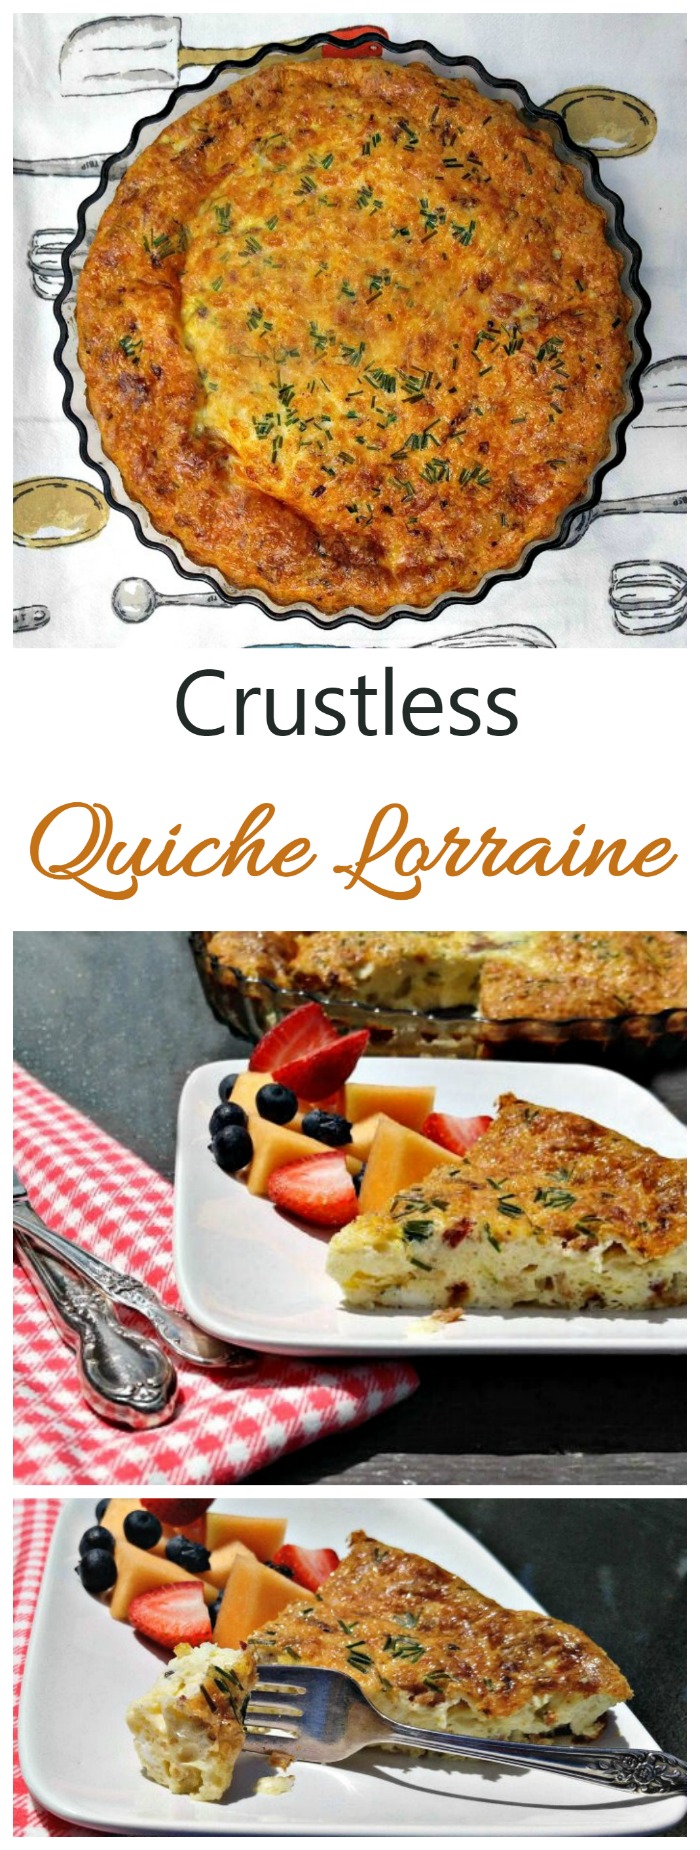 This crustless Quiche Lorraine is full of flavor but has been slimmed down to make it more calorie friendly.